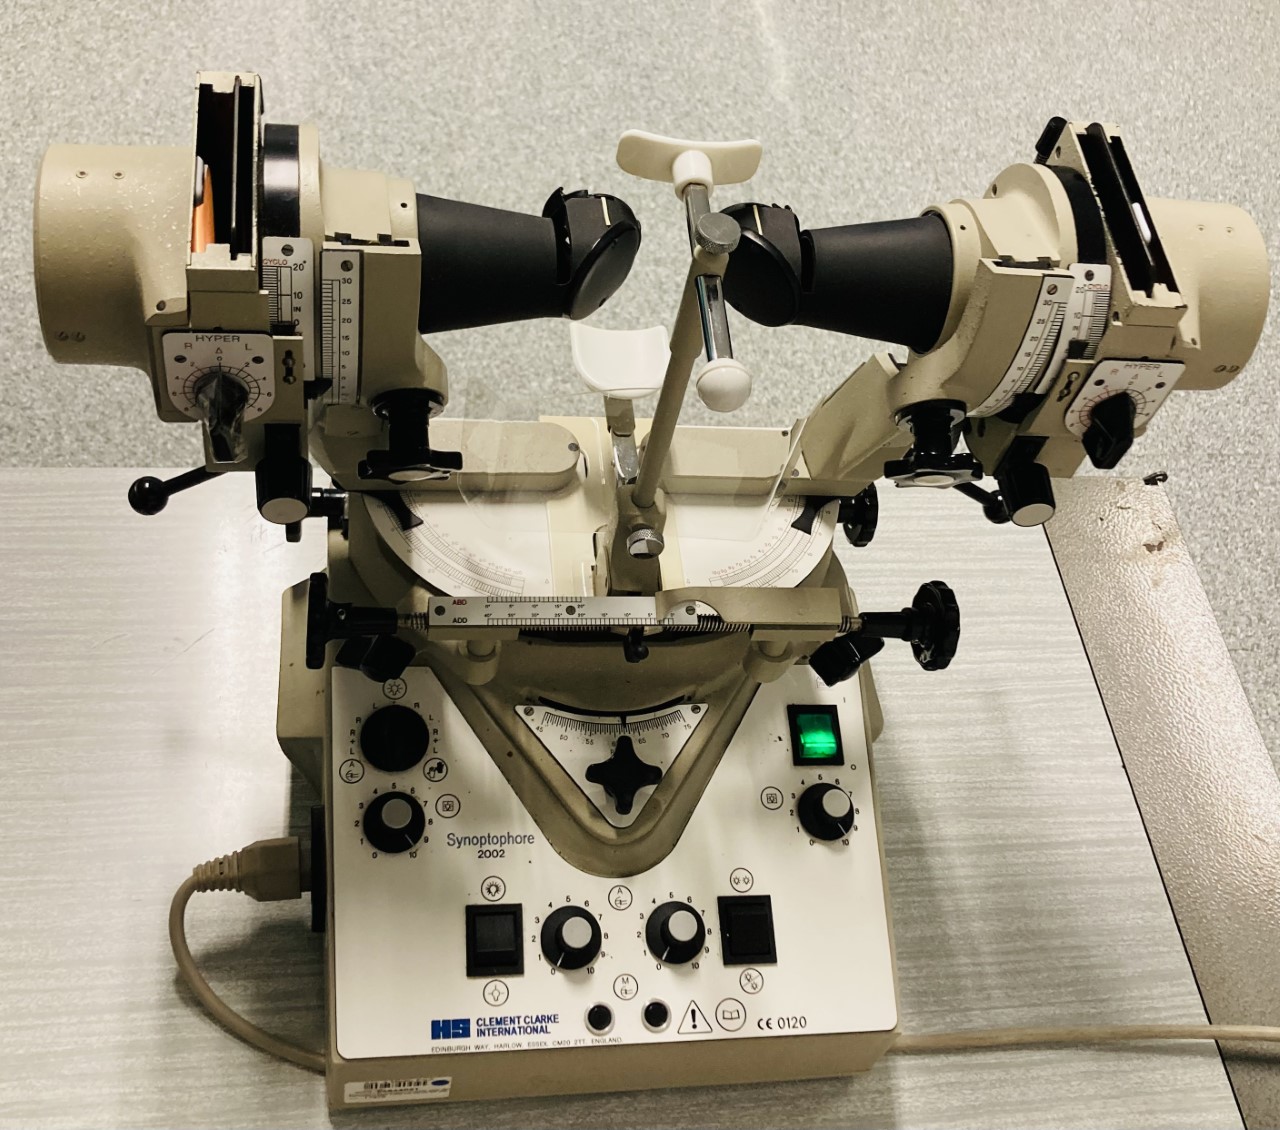 Synoptophore used to test for ocular deviation and strabismus.